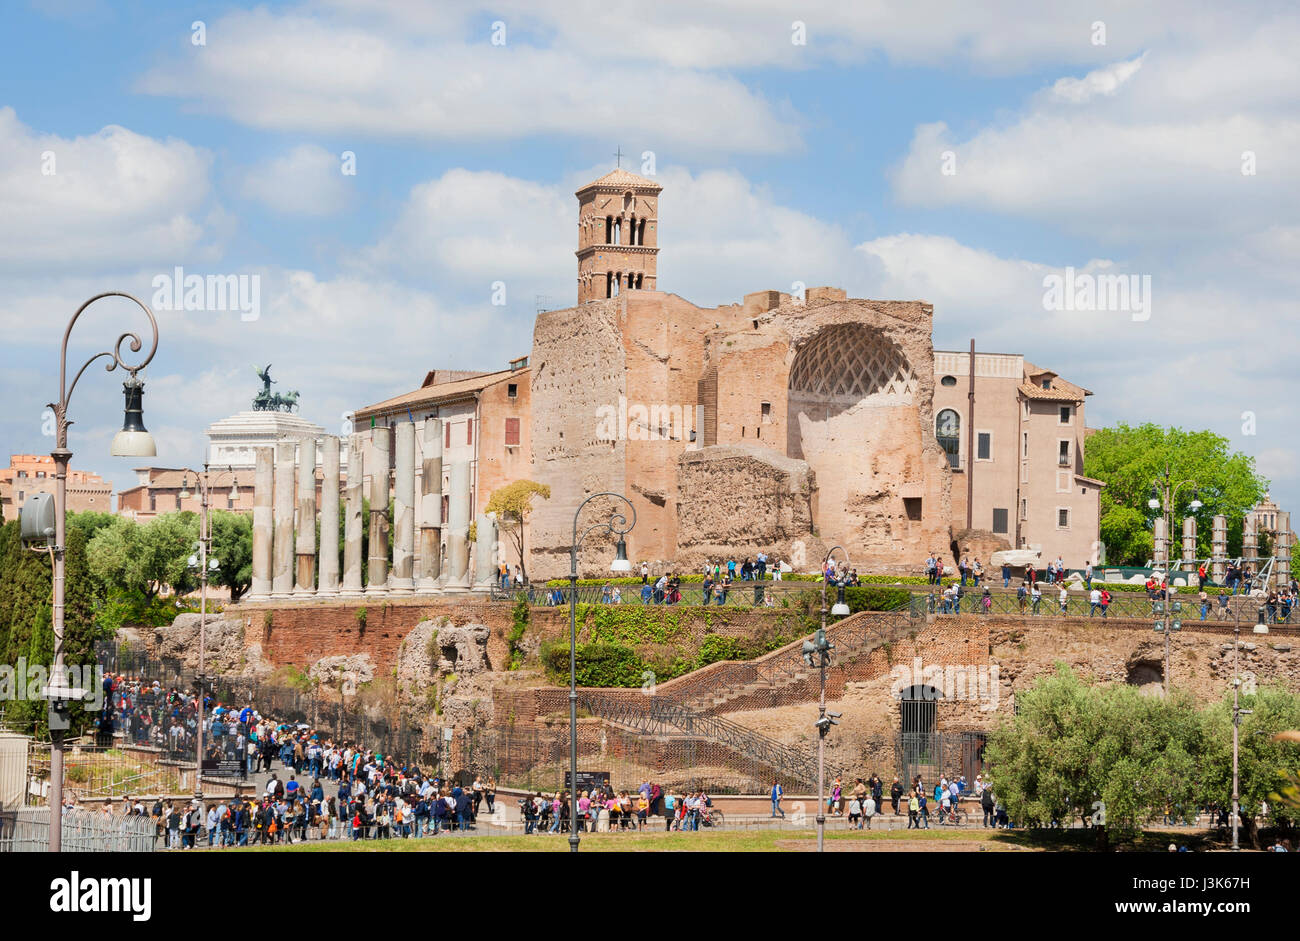 Tourists visit Rome central archaeological area with ancient Temple of Venus and Roma ruins Stock Photo